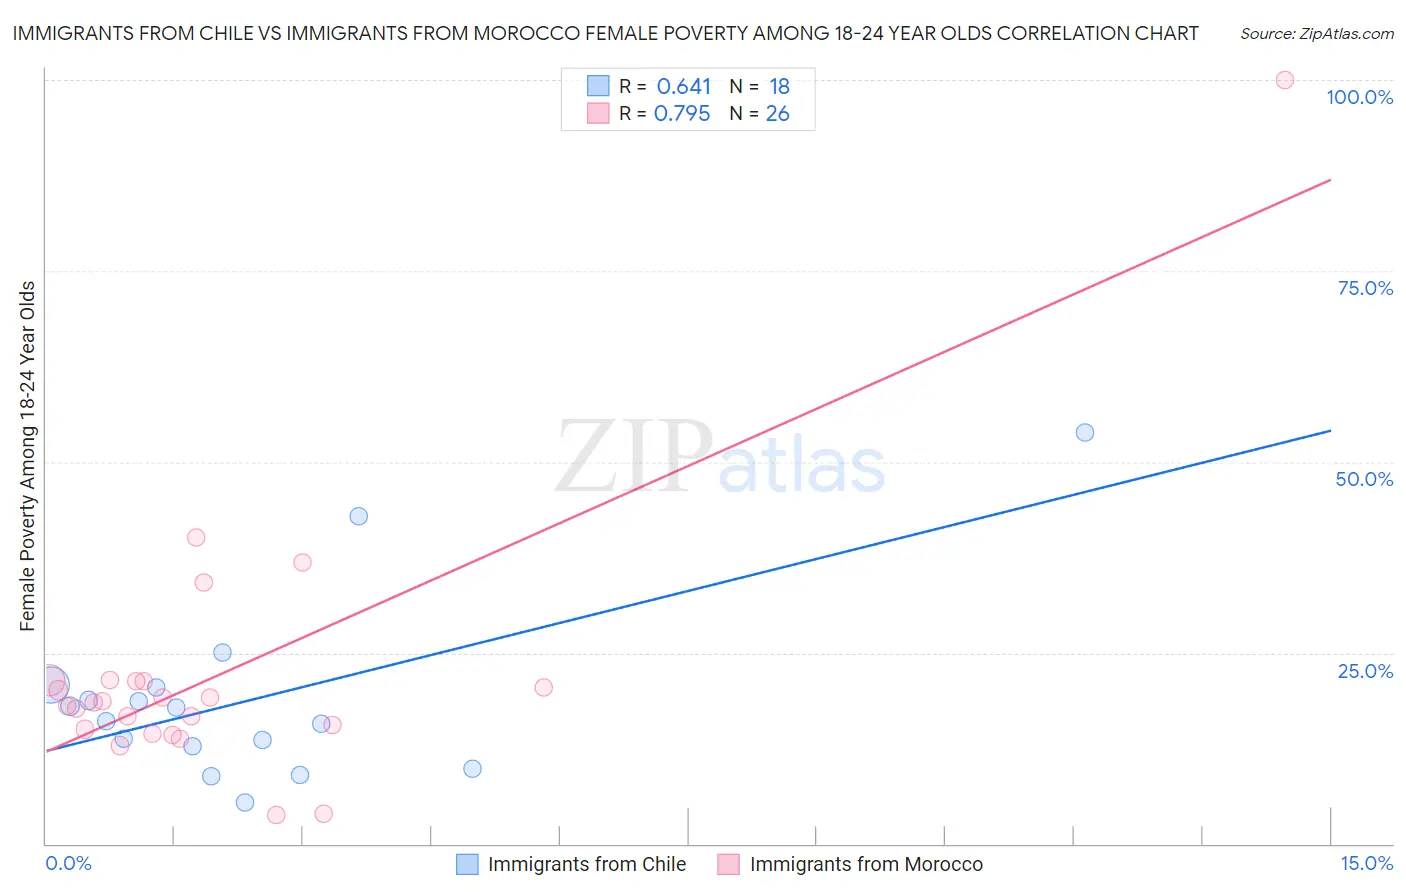 Immigrants from Chile vs Immigrants from Morocco Female Poverty Among 18-24 Year Olds